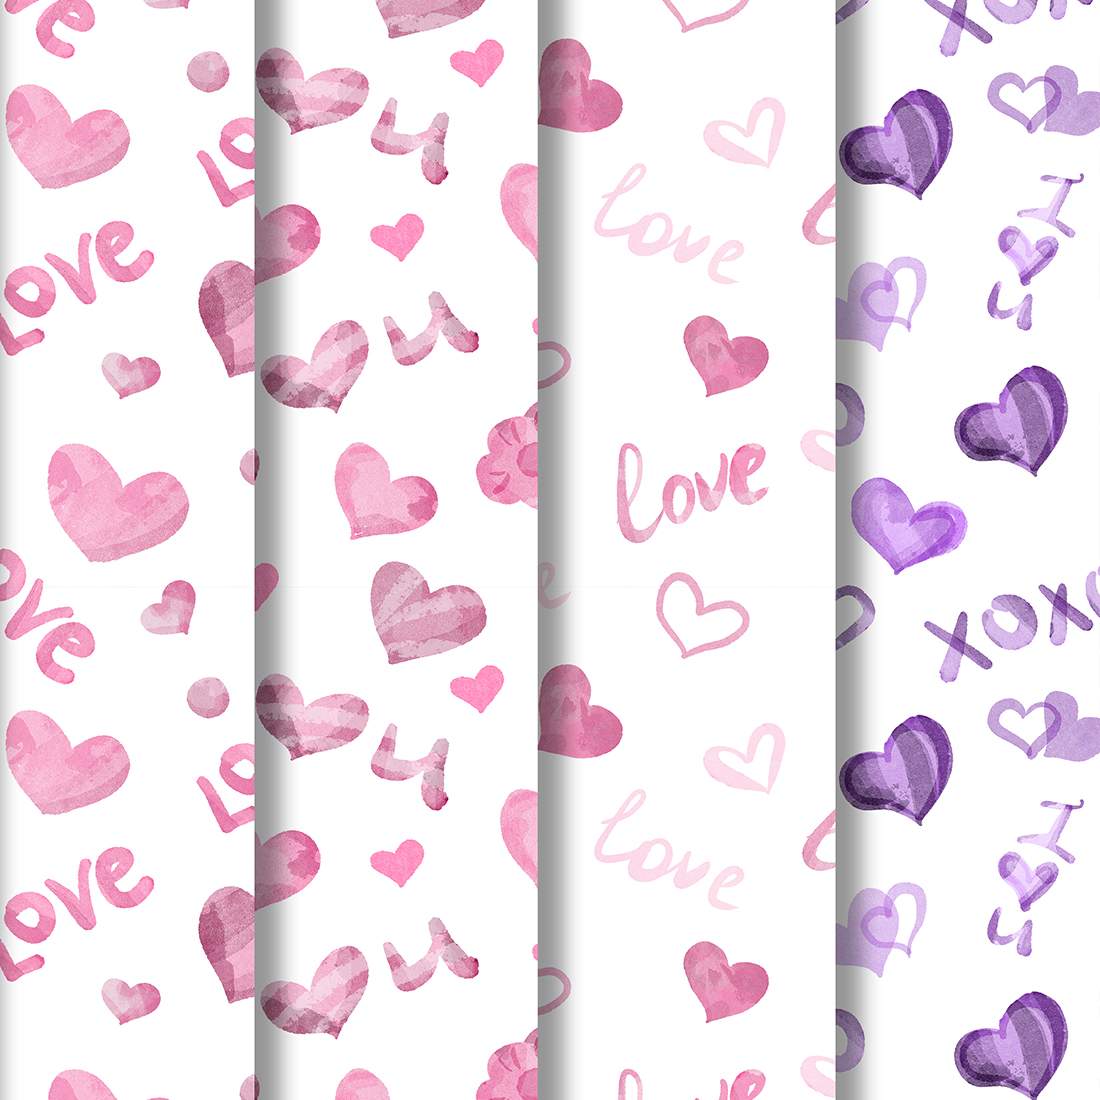 LOVE U valentine hearts seamless pattern preview image.